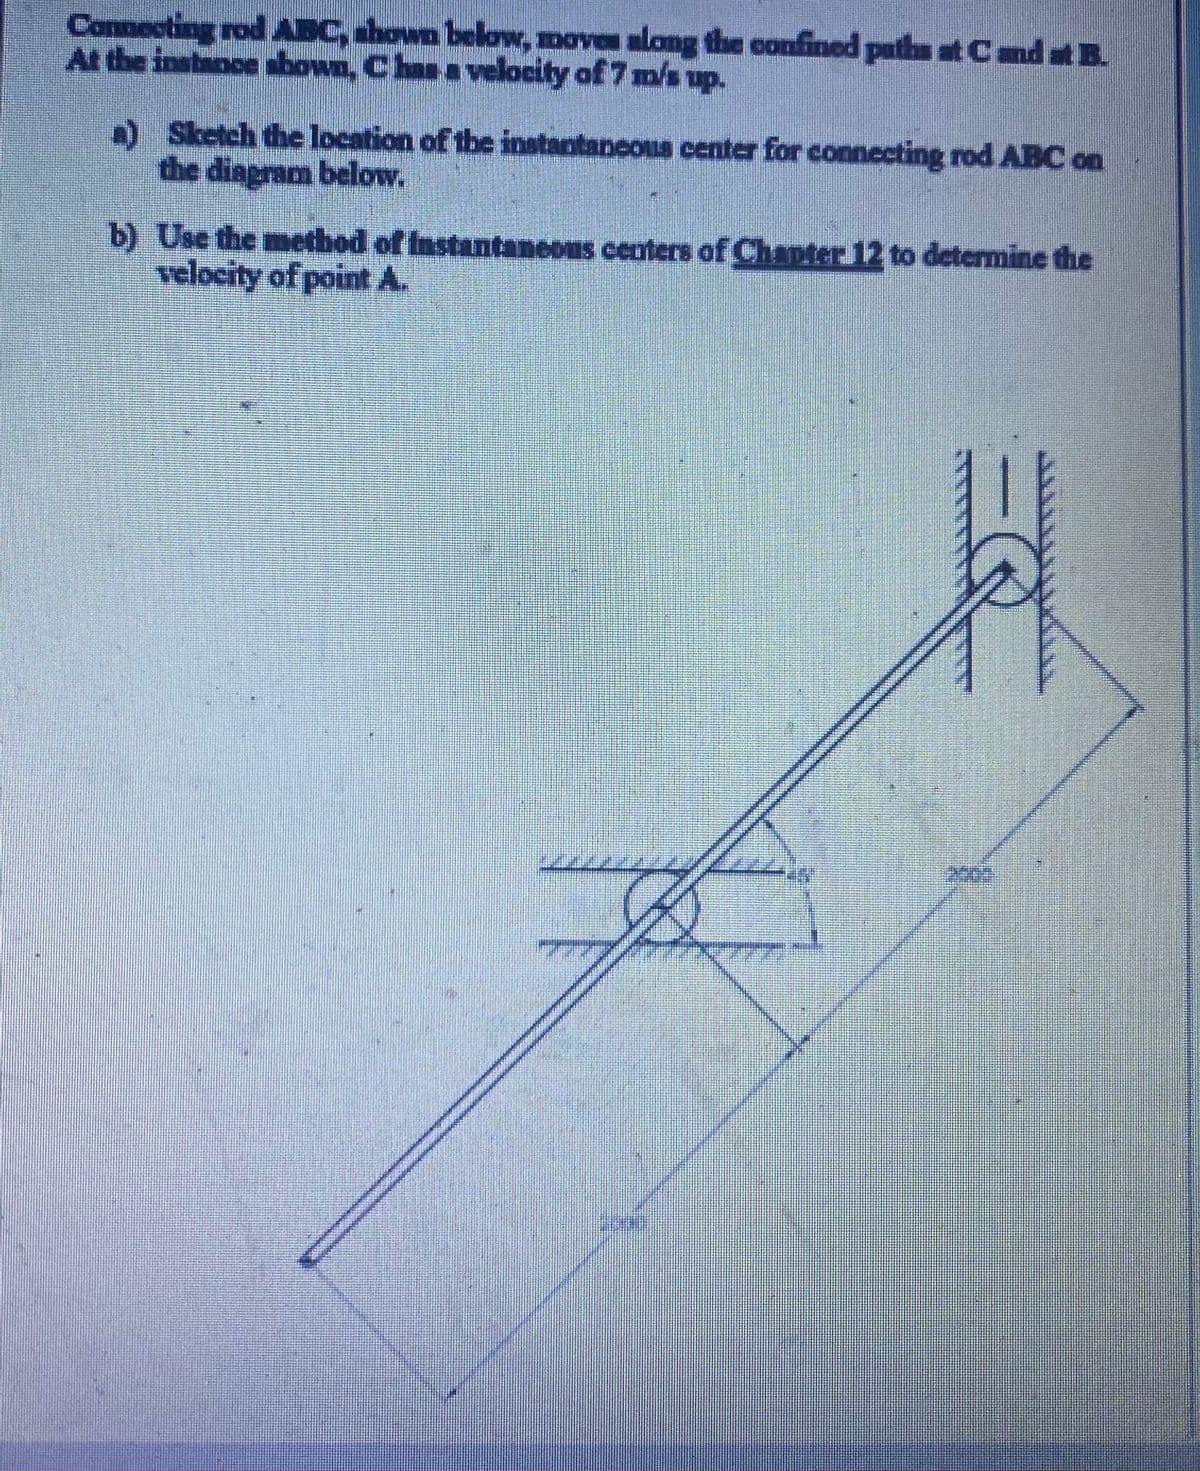 Connecting rod AEC, ahown below, moves along the confined paths at Cnd at B.
At the instance shown, Chan a velocity of 7 m/s up.
a) Sketch the location of the instantaneous center for connecting rod ABC on
the diagram below.
b) Use the method of Instantaneous centers of Chapter 12 to determine the
velocity of point A.
2003
